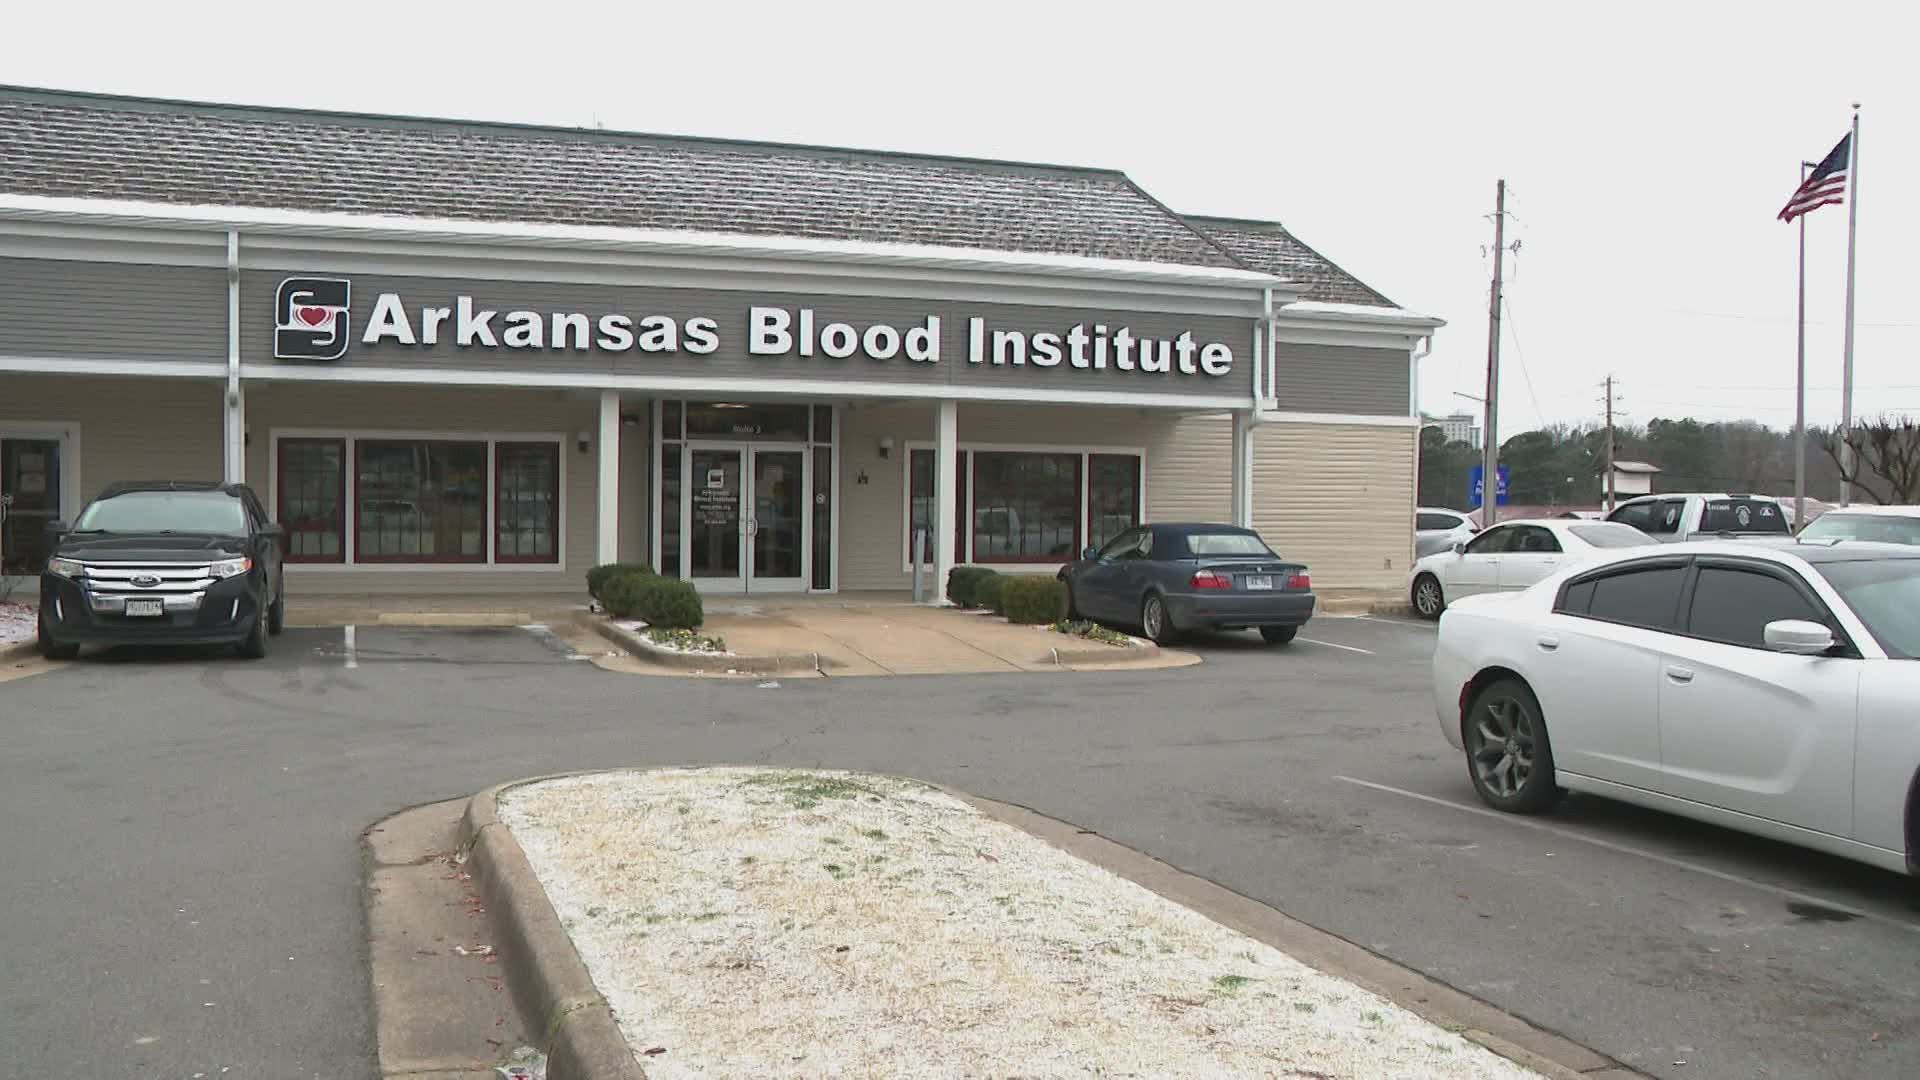 Multiple blood drives are scheduled in Arkansas. They come as the Arkansas Blood Institute faces a growing need for donors.